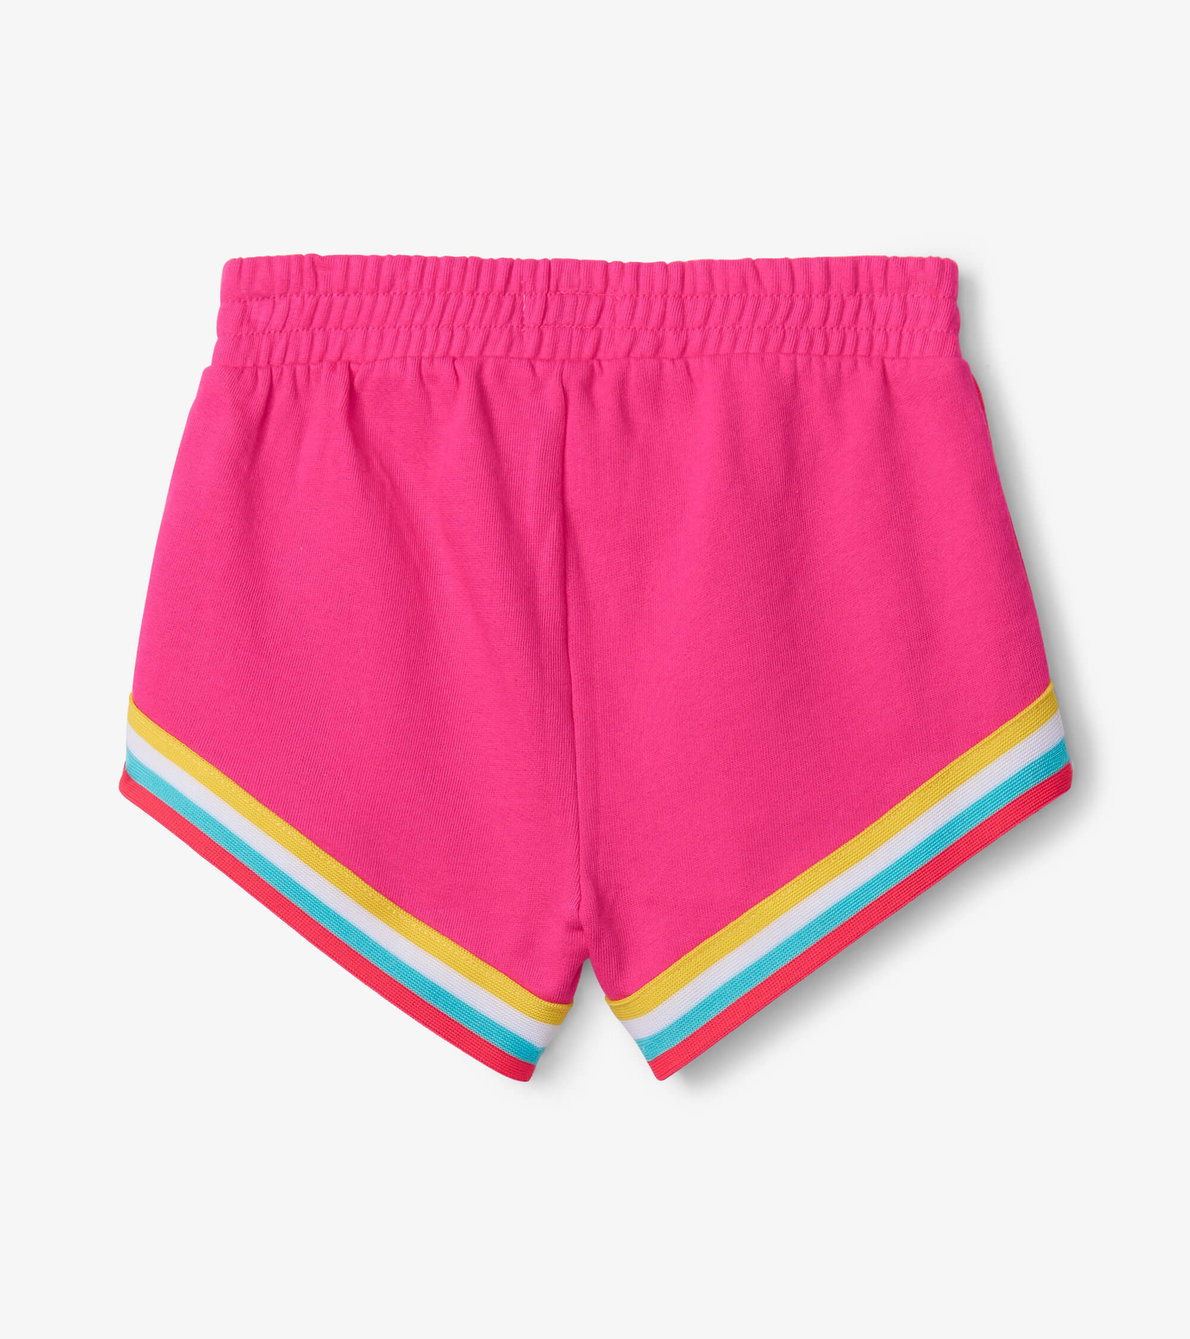 View larger image of Fuchsia Purple Terry Jogging Shorts